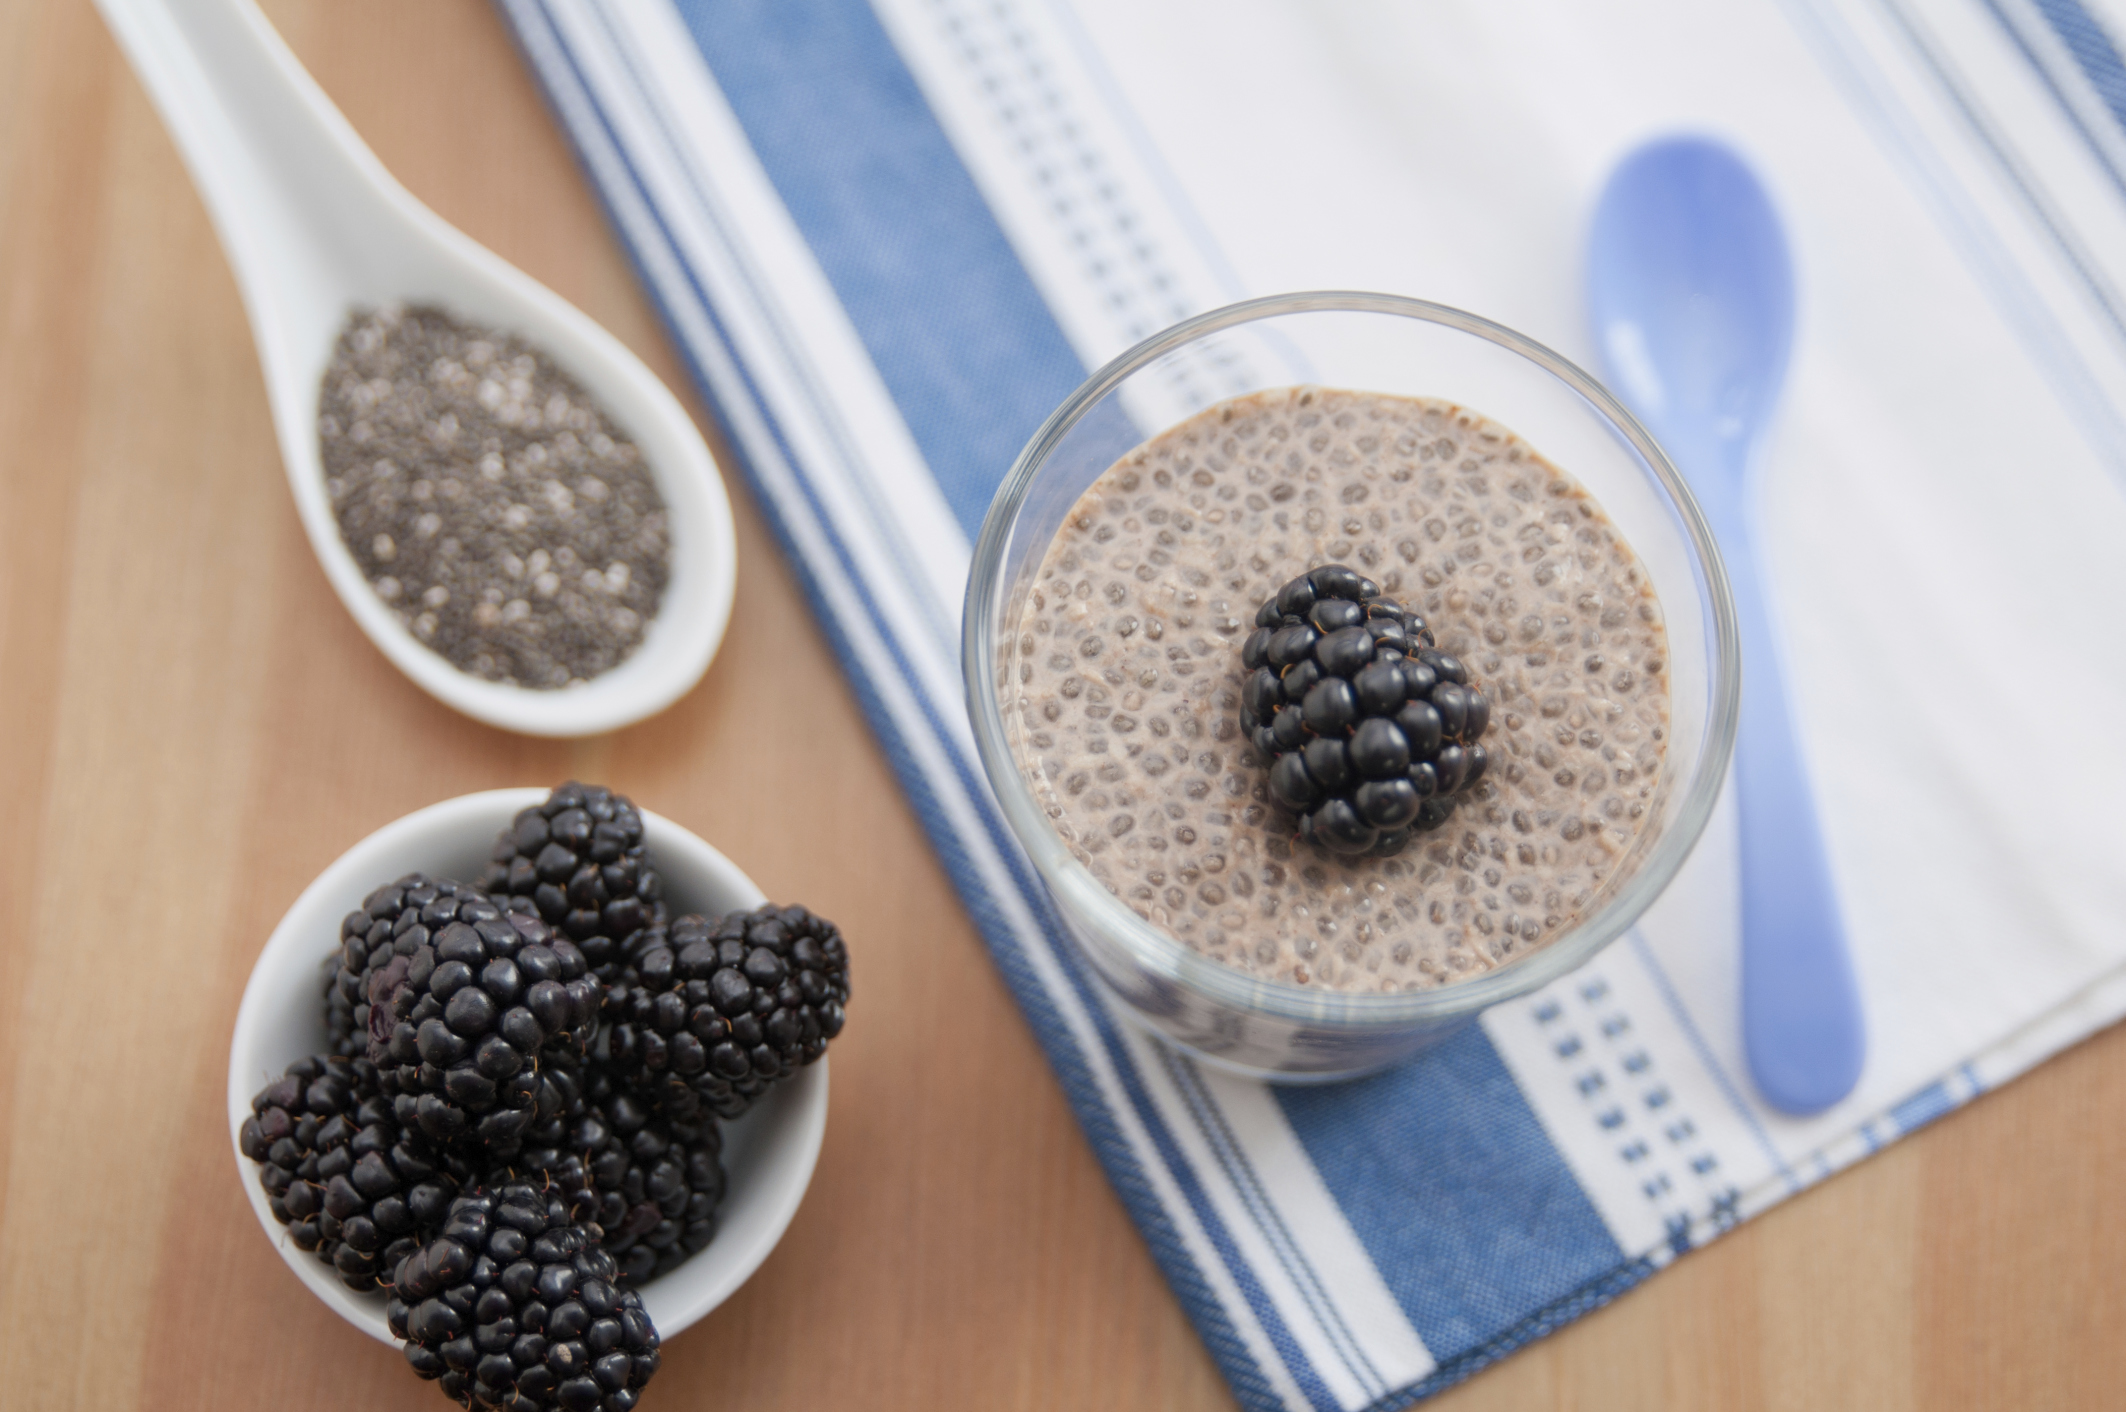 The health benefits of chia seeds